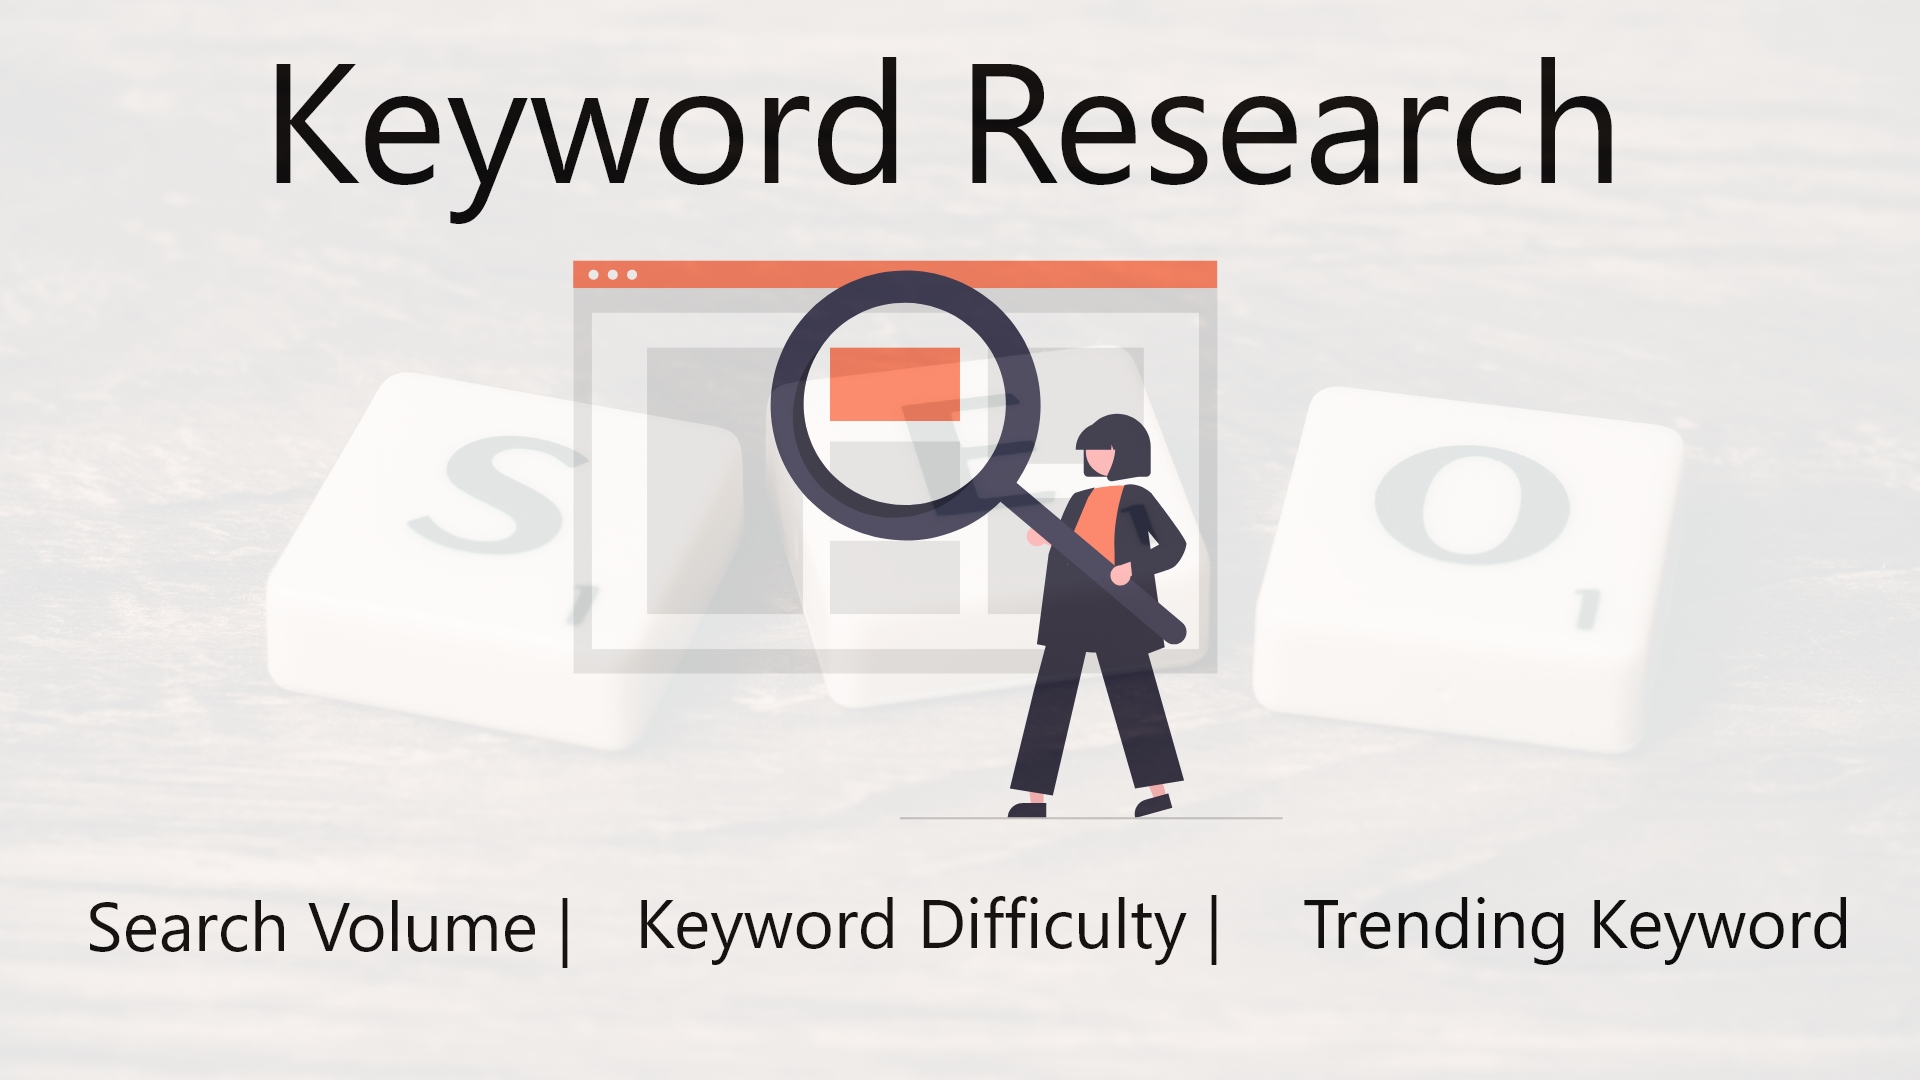 IS KEYWORD RESEARCH STILL IMPORTANT?